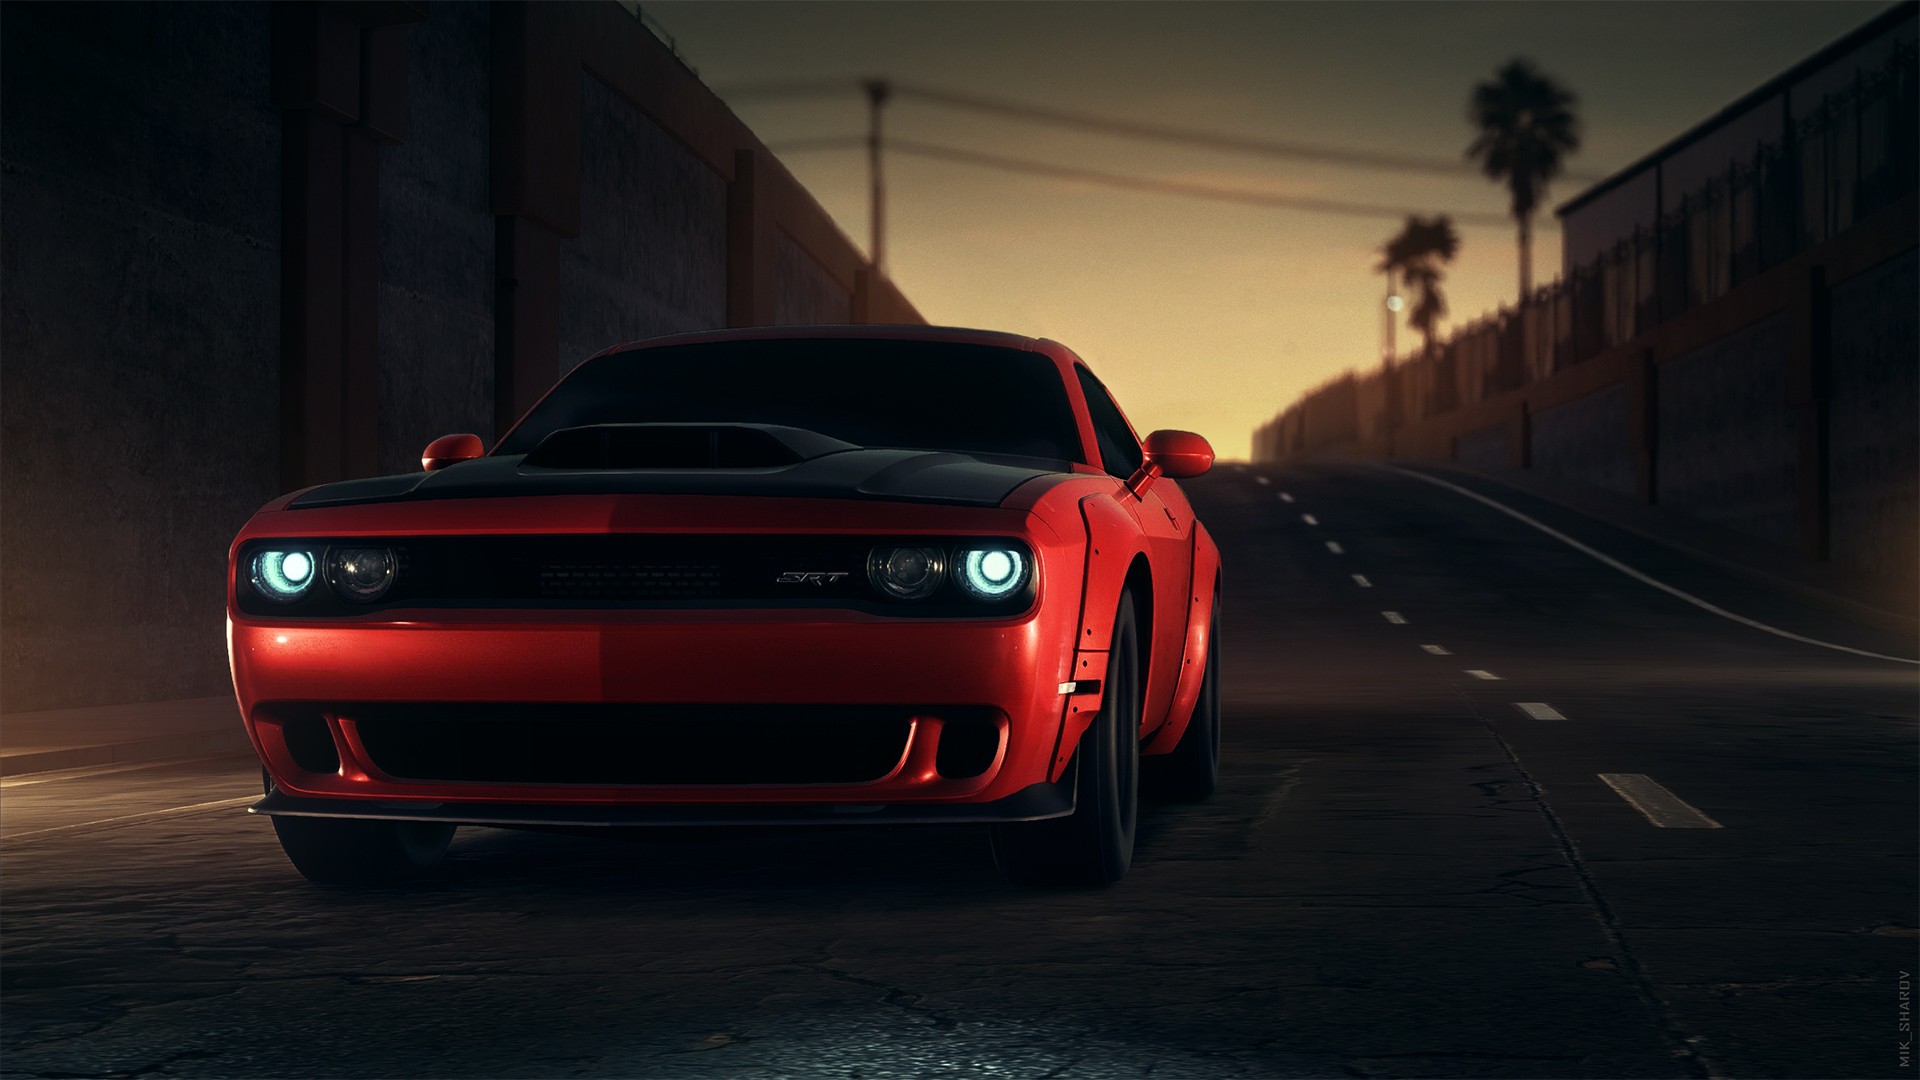 Dodge Challenger Dodge Car Red Car Muscle Car 1920x1080